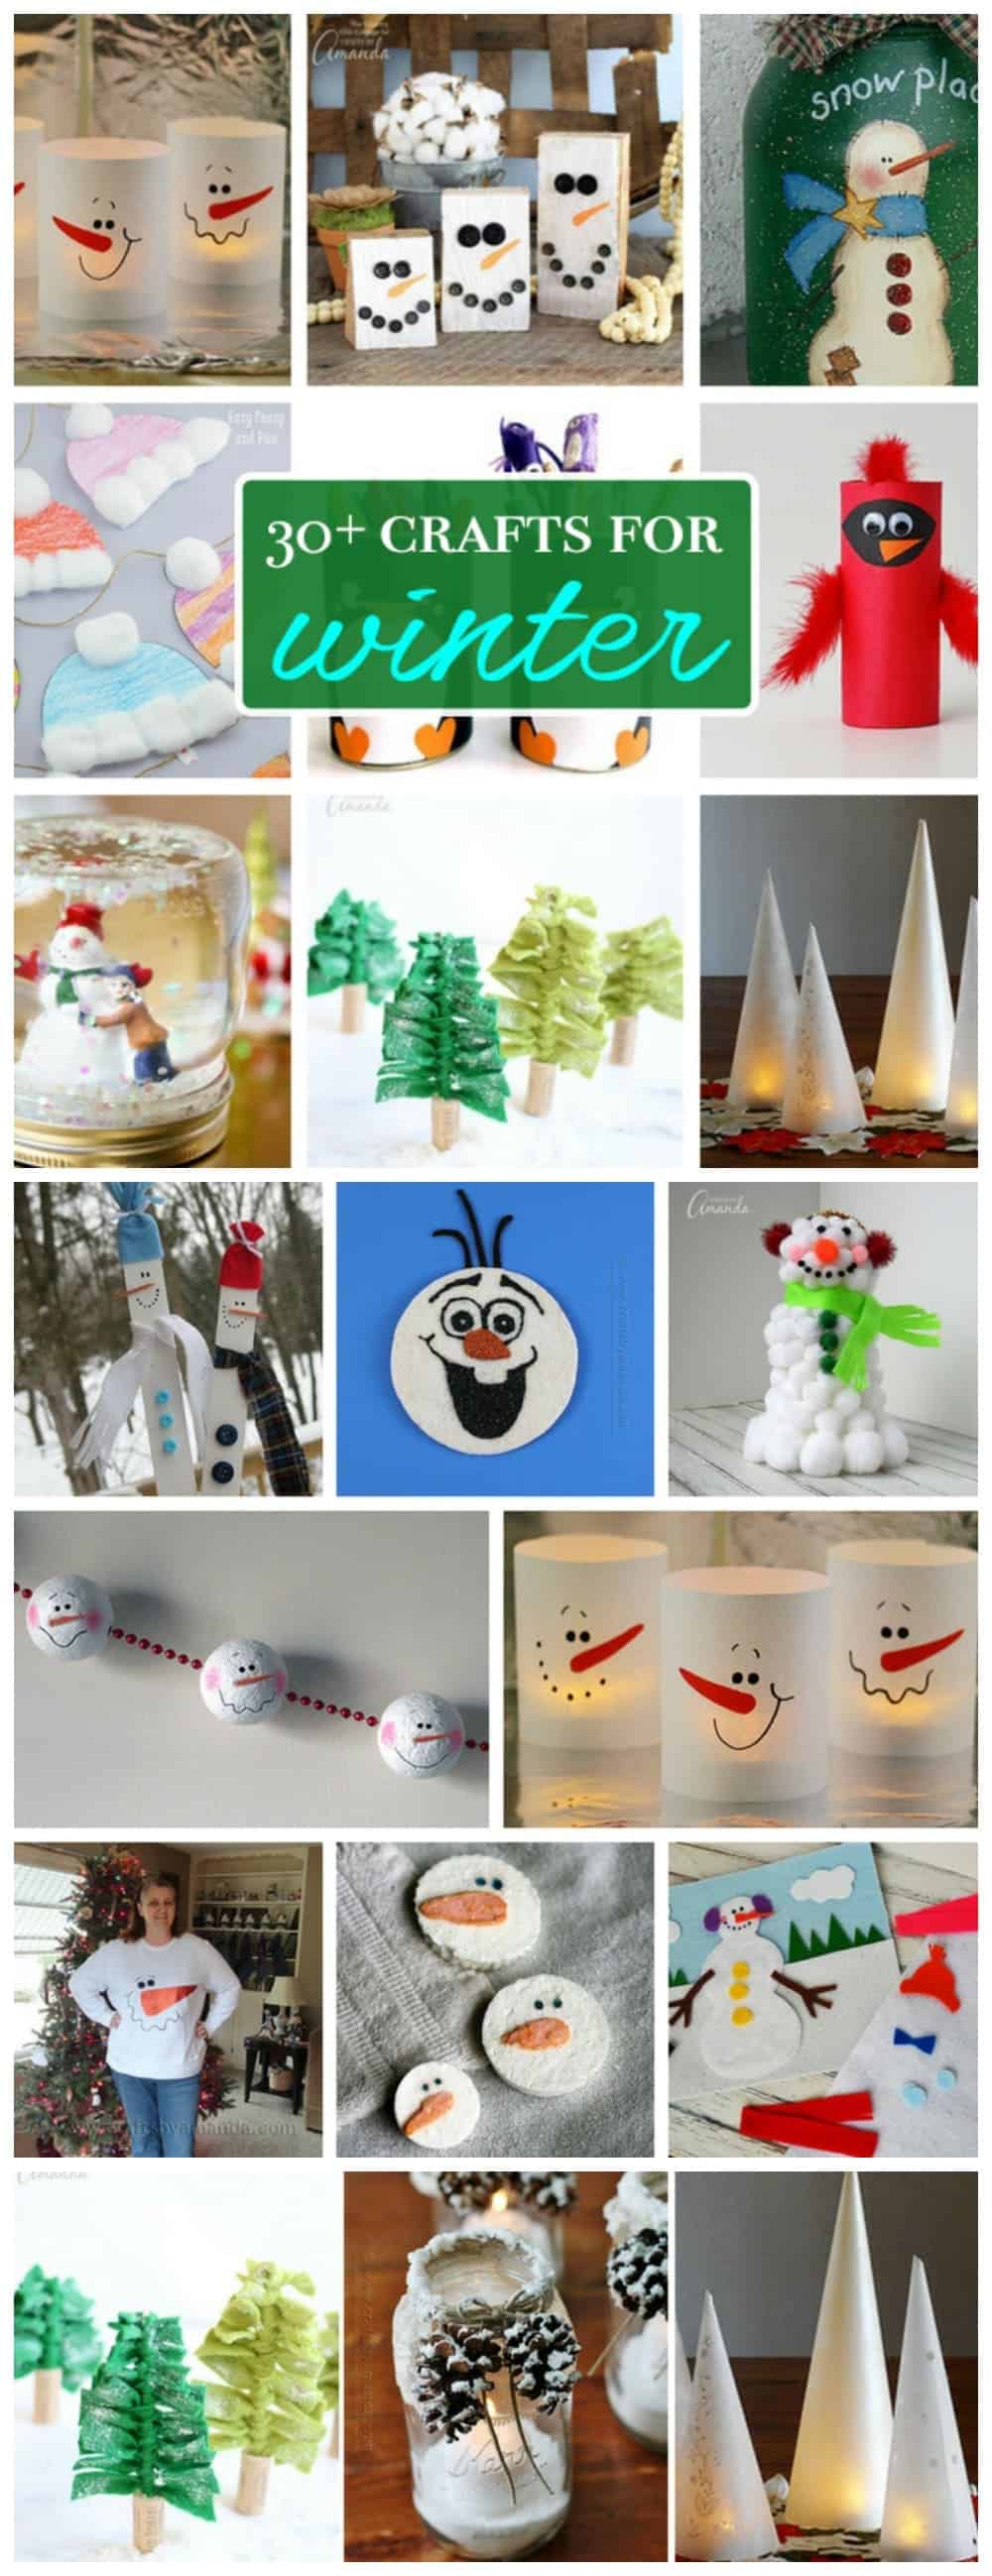 Winter Crafts: We have everything from crafts inspired by our feathered friends, to snowflake and snowman crafts, and of course some mason jar crafts!